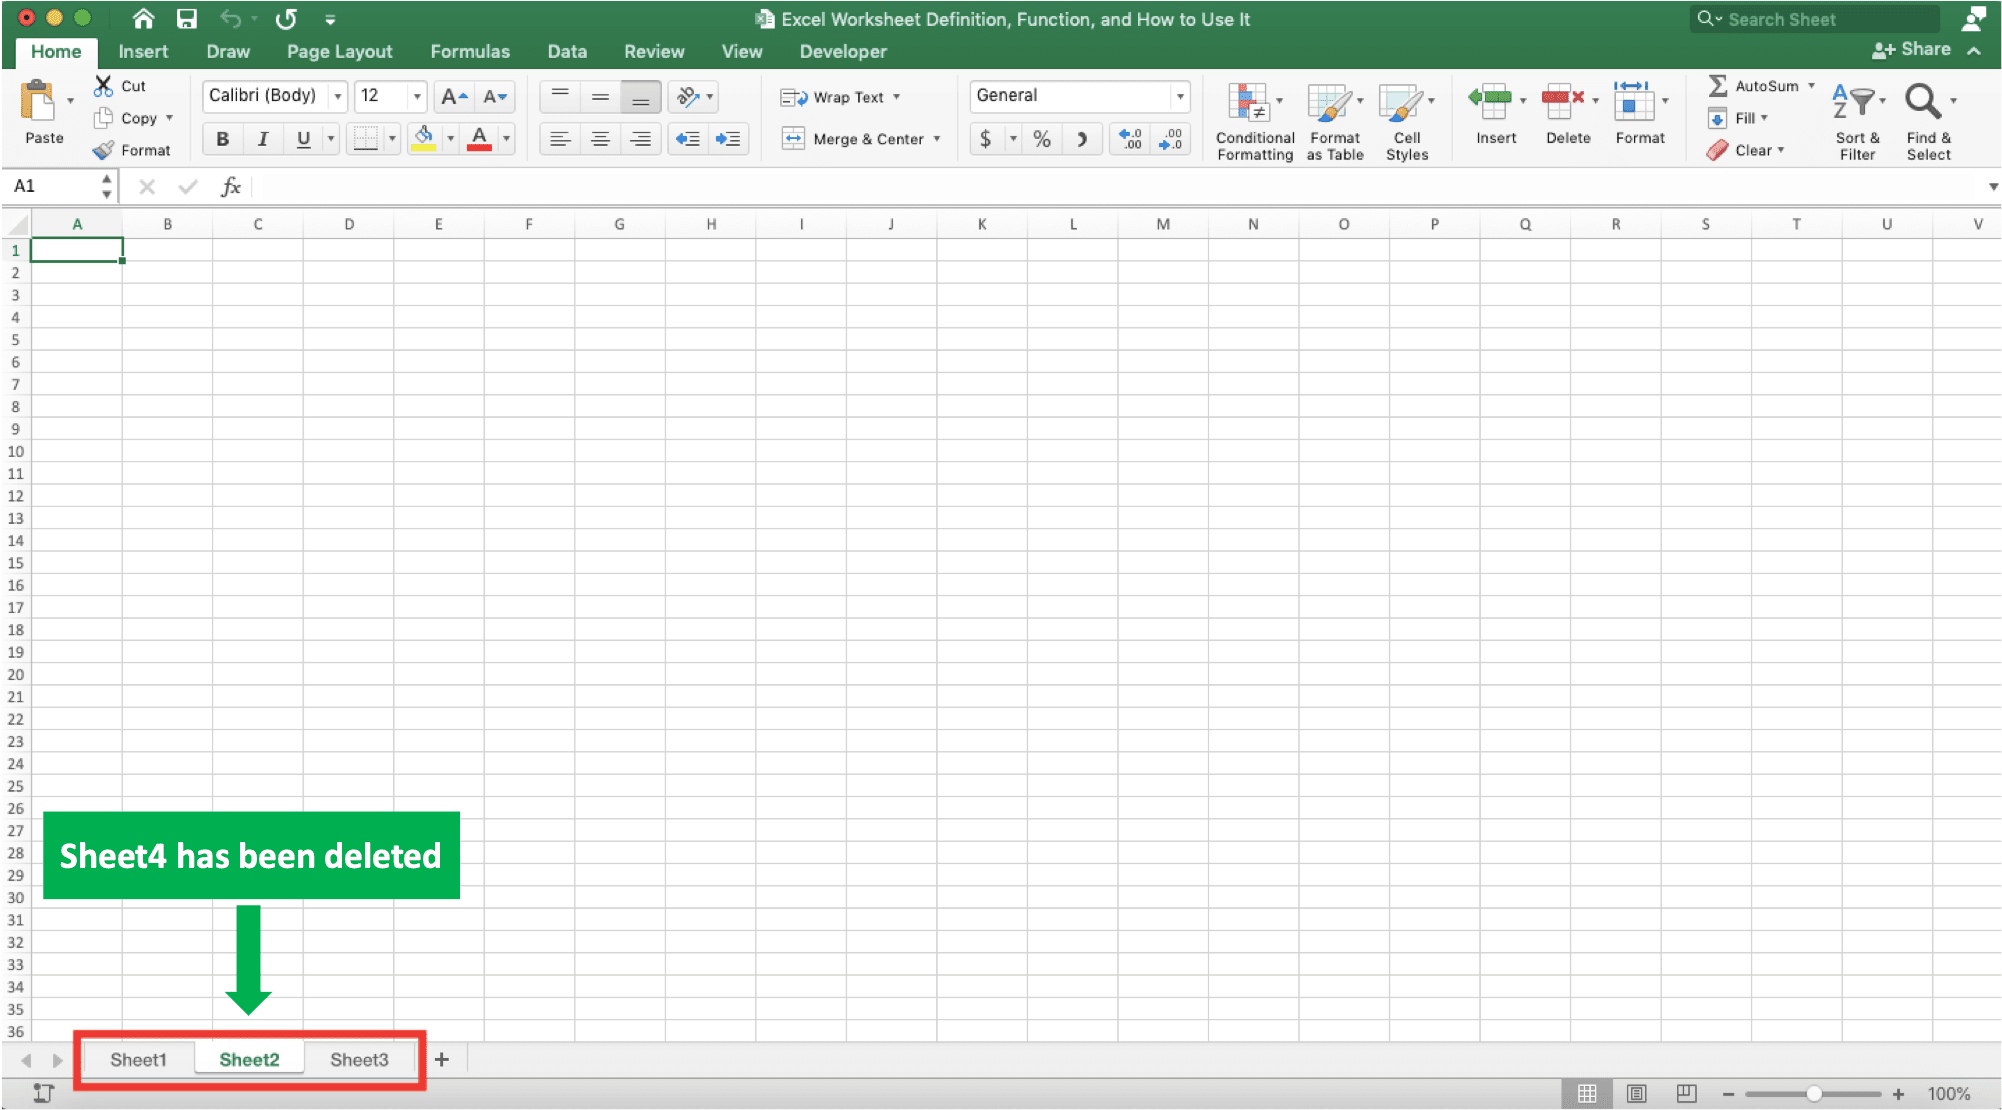 Excel Worksheet Definition, Function, and How to Use It - Screenshot of the Result Example for Deleting a Sheet in Excel